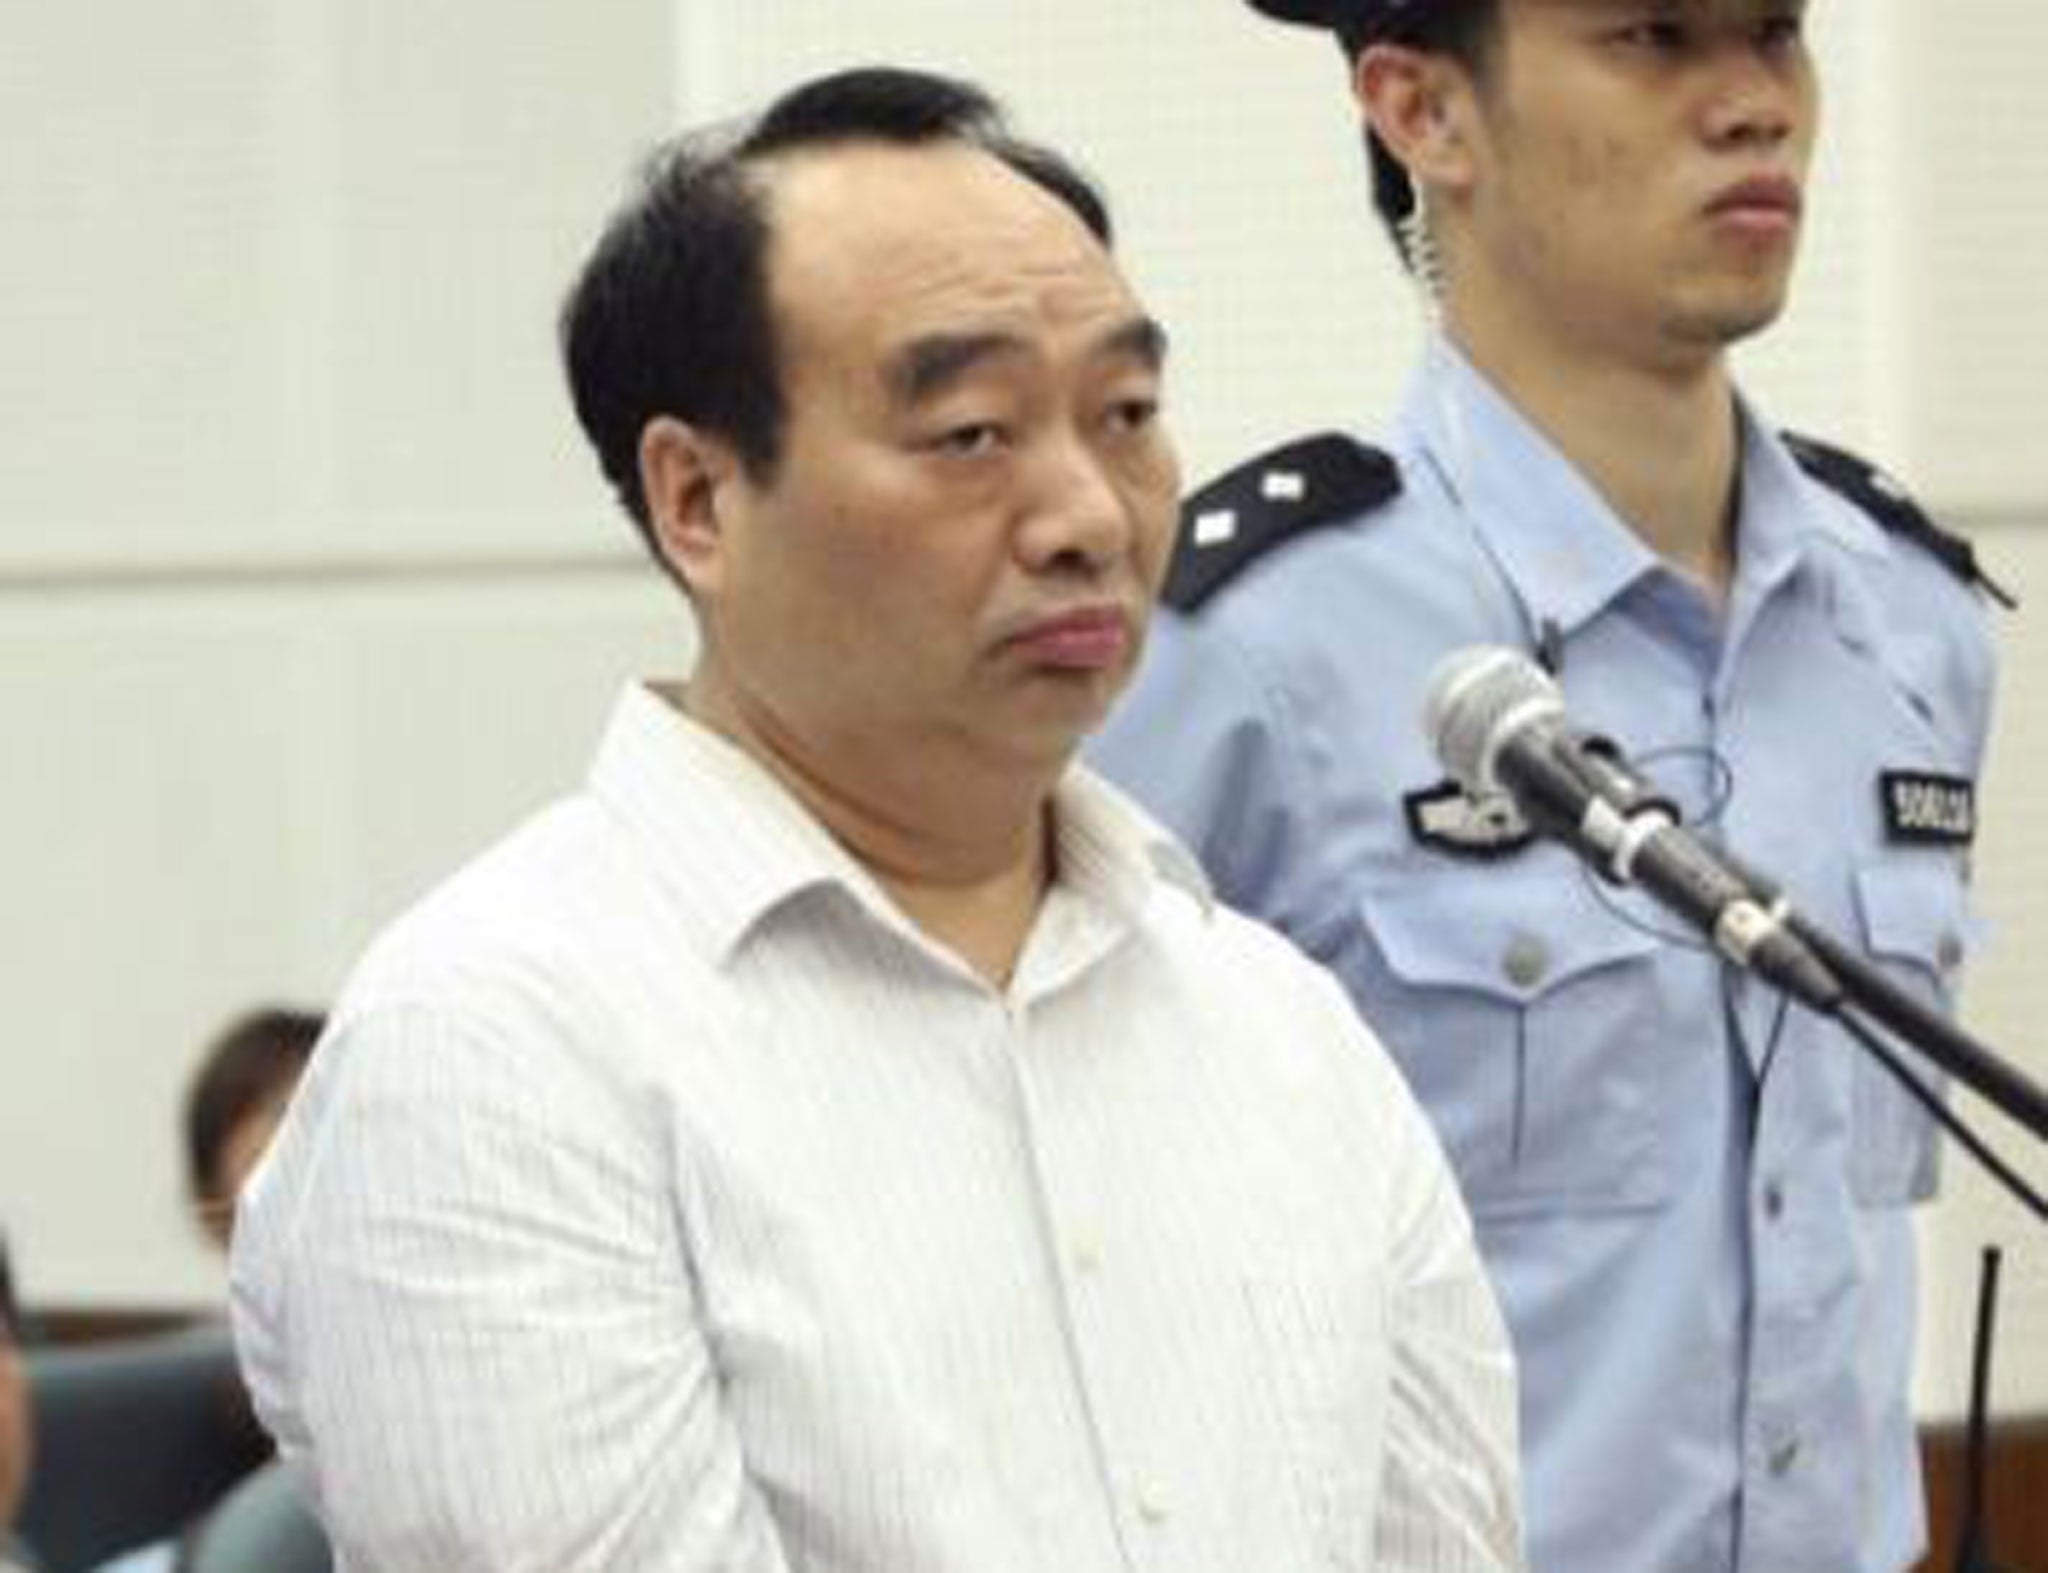 Lei Zhengfu was convicted of taking more than 3.1 million yuan in bribes